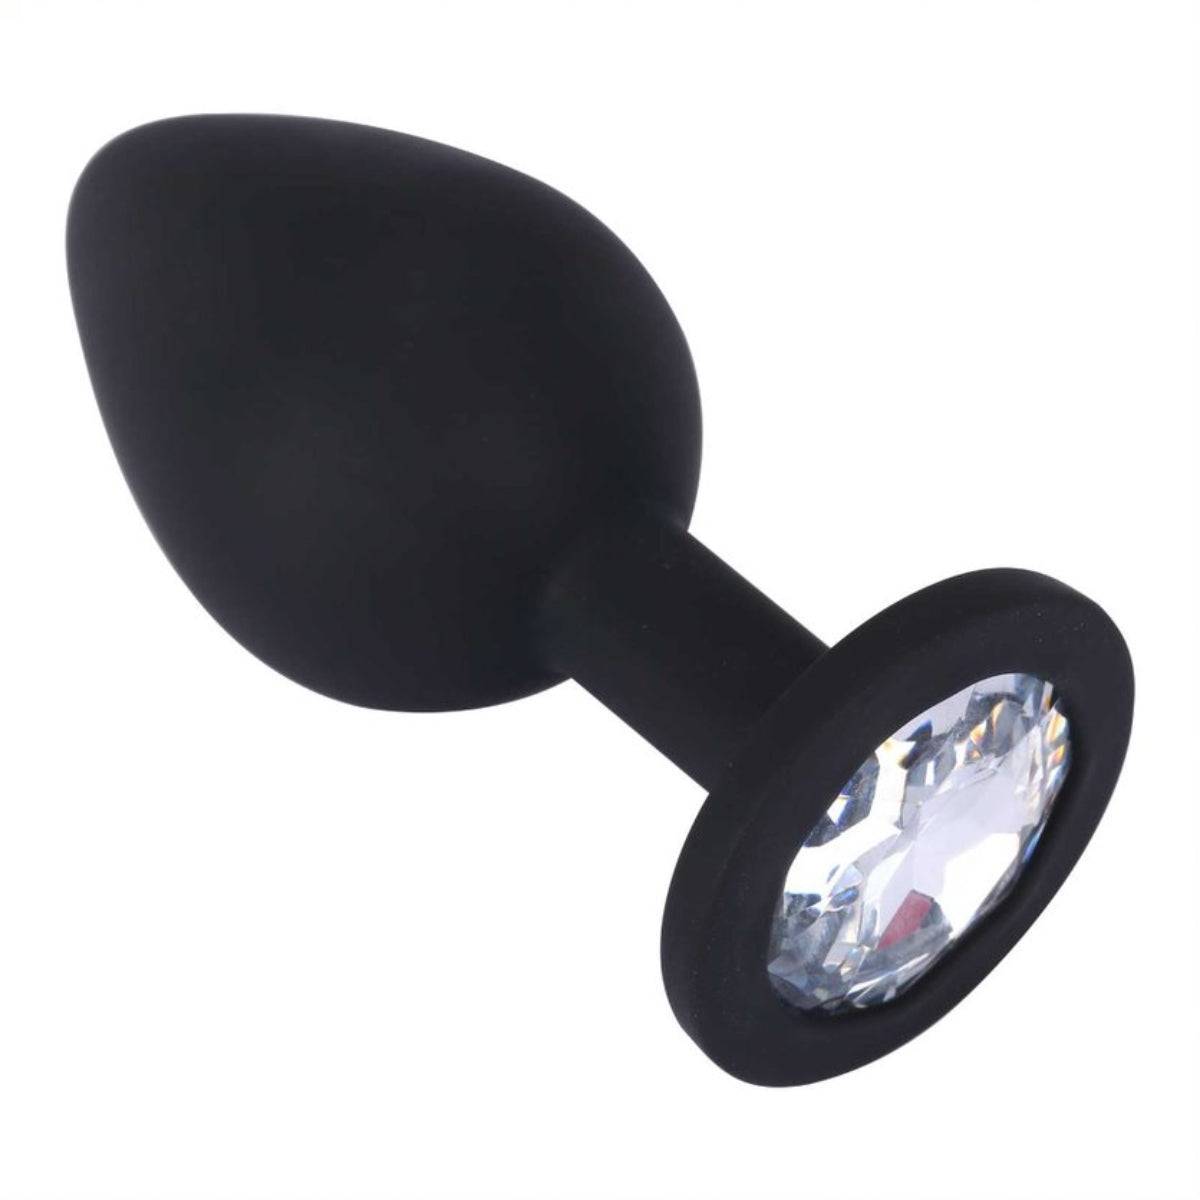 Side View Product - Me You Us Trio Of Jewels Jewelled Butt Plug Set Black - Simply Pleasure